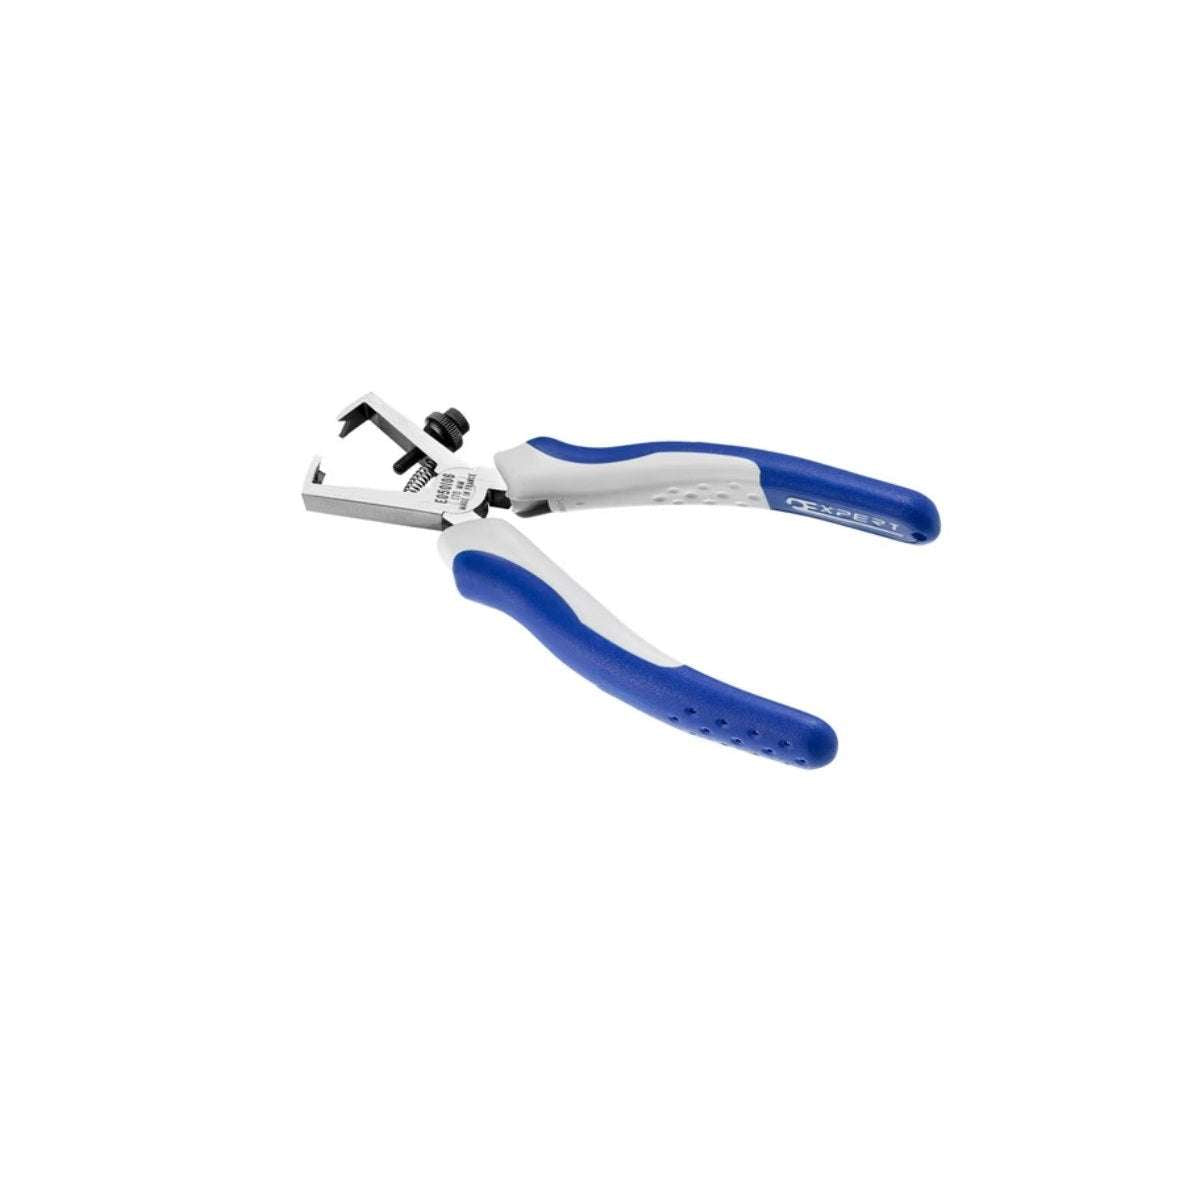 Comfort Grip 170 mm wire stripper 0.75 to 6mm - Expert Facom